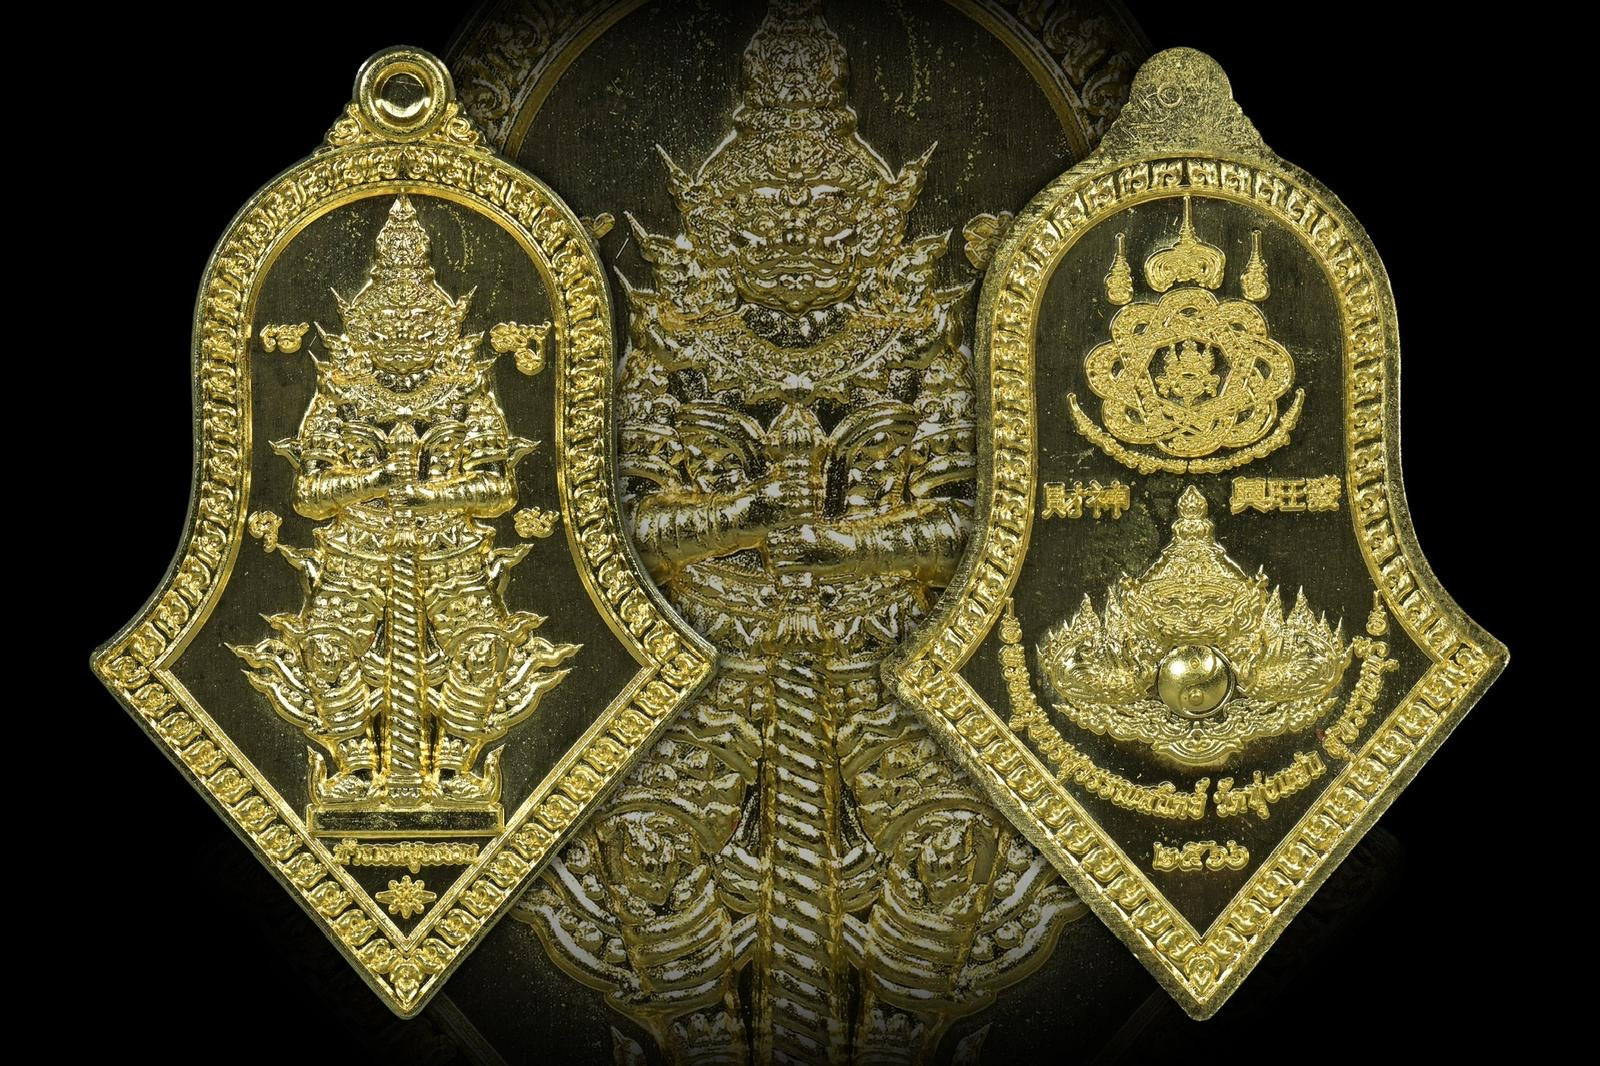 introducing our newest arrival - the blessed Taowesuwan amulet from Luang Phor Kai of Wat Toon Faek. Months of planning and ritual have gone into creating this powerful piece to bring prosperity, wealth and protection to the wearer.